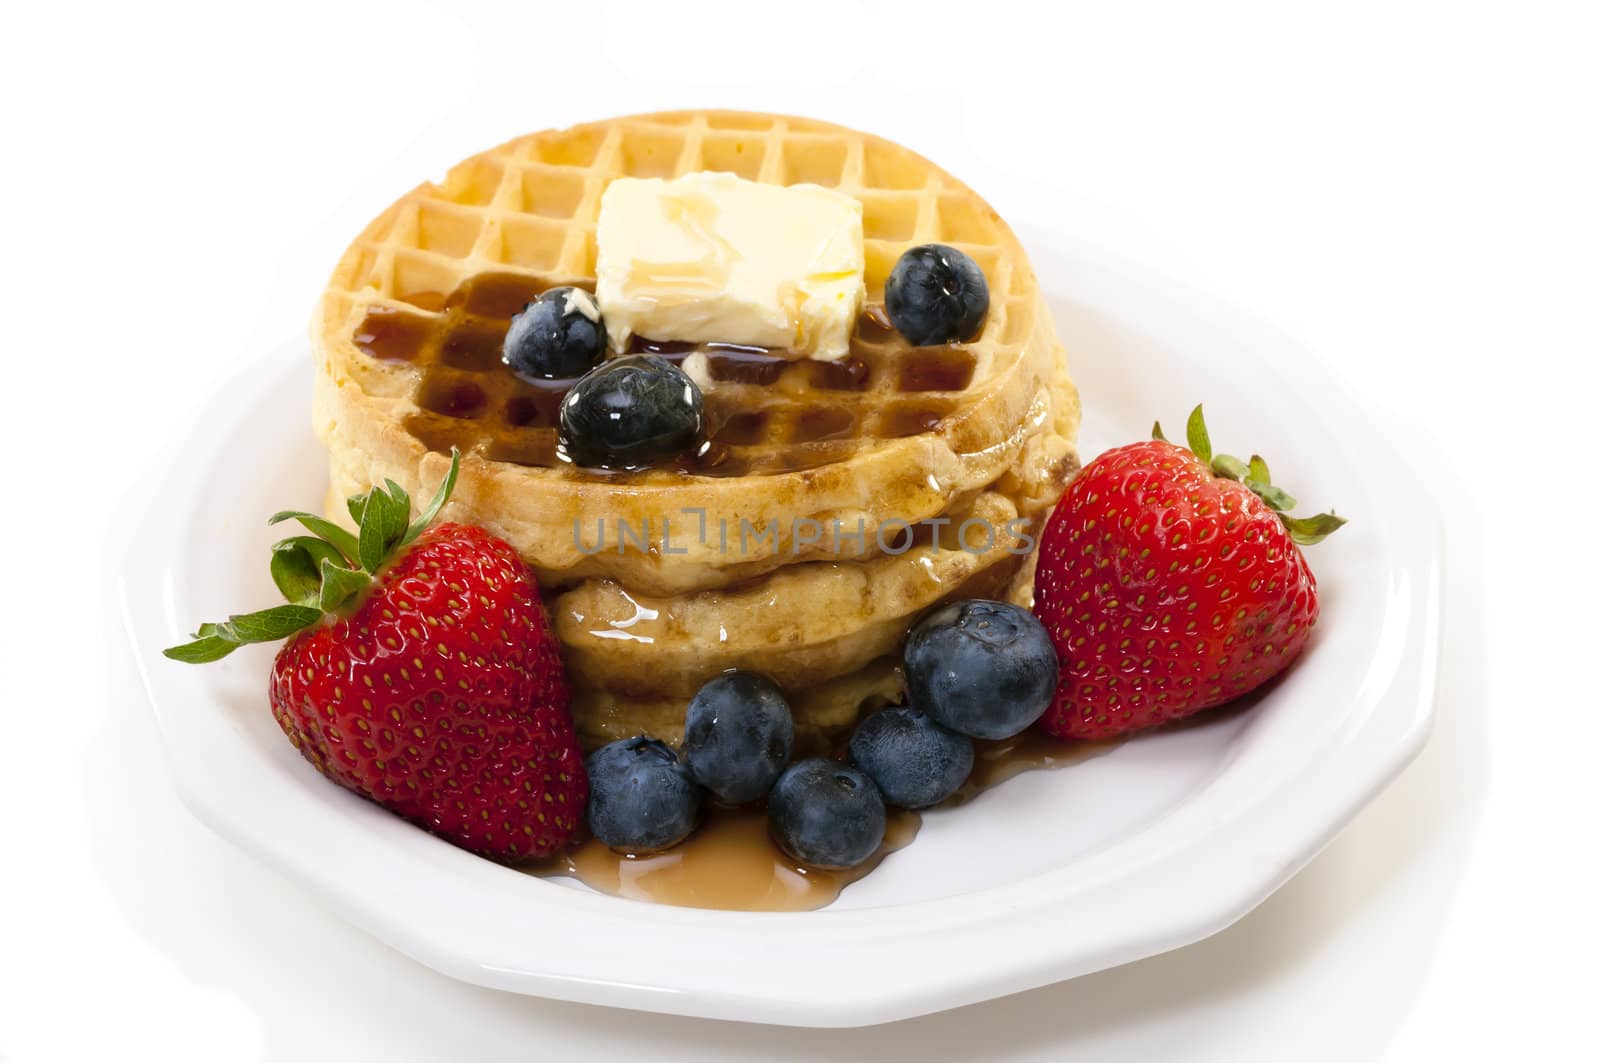 Breakfast with Waffles and Fruit by dehooks